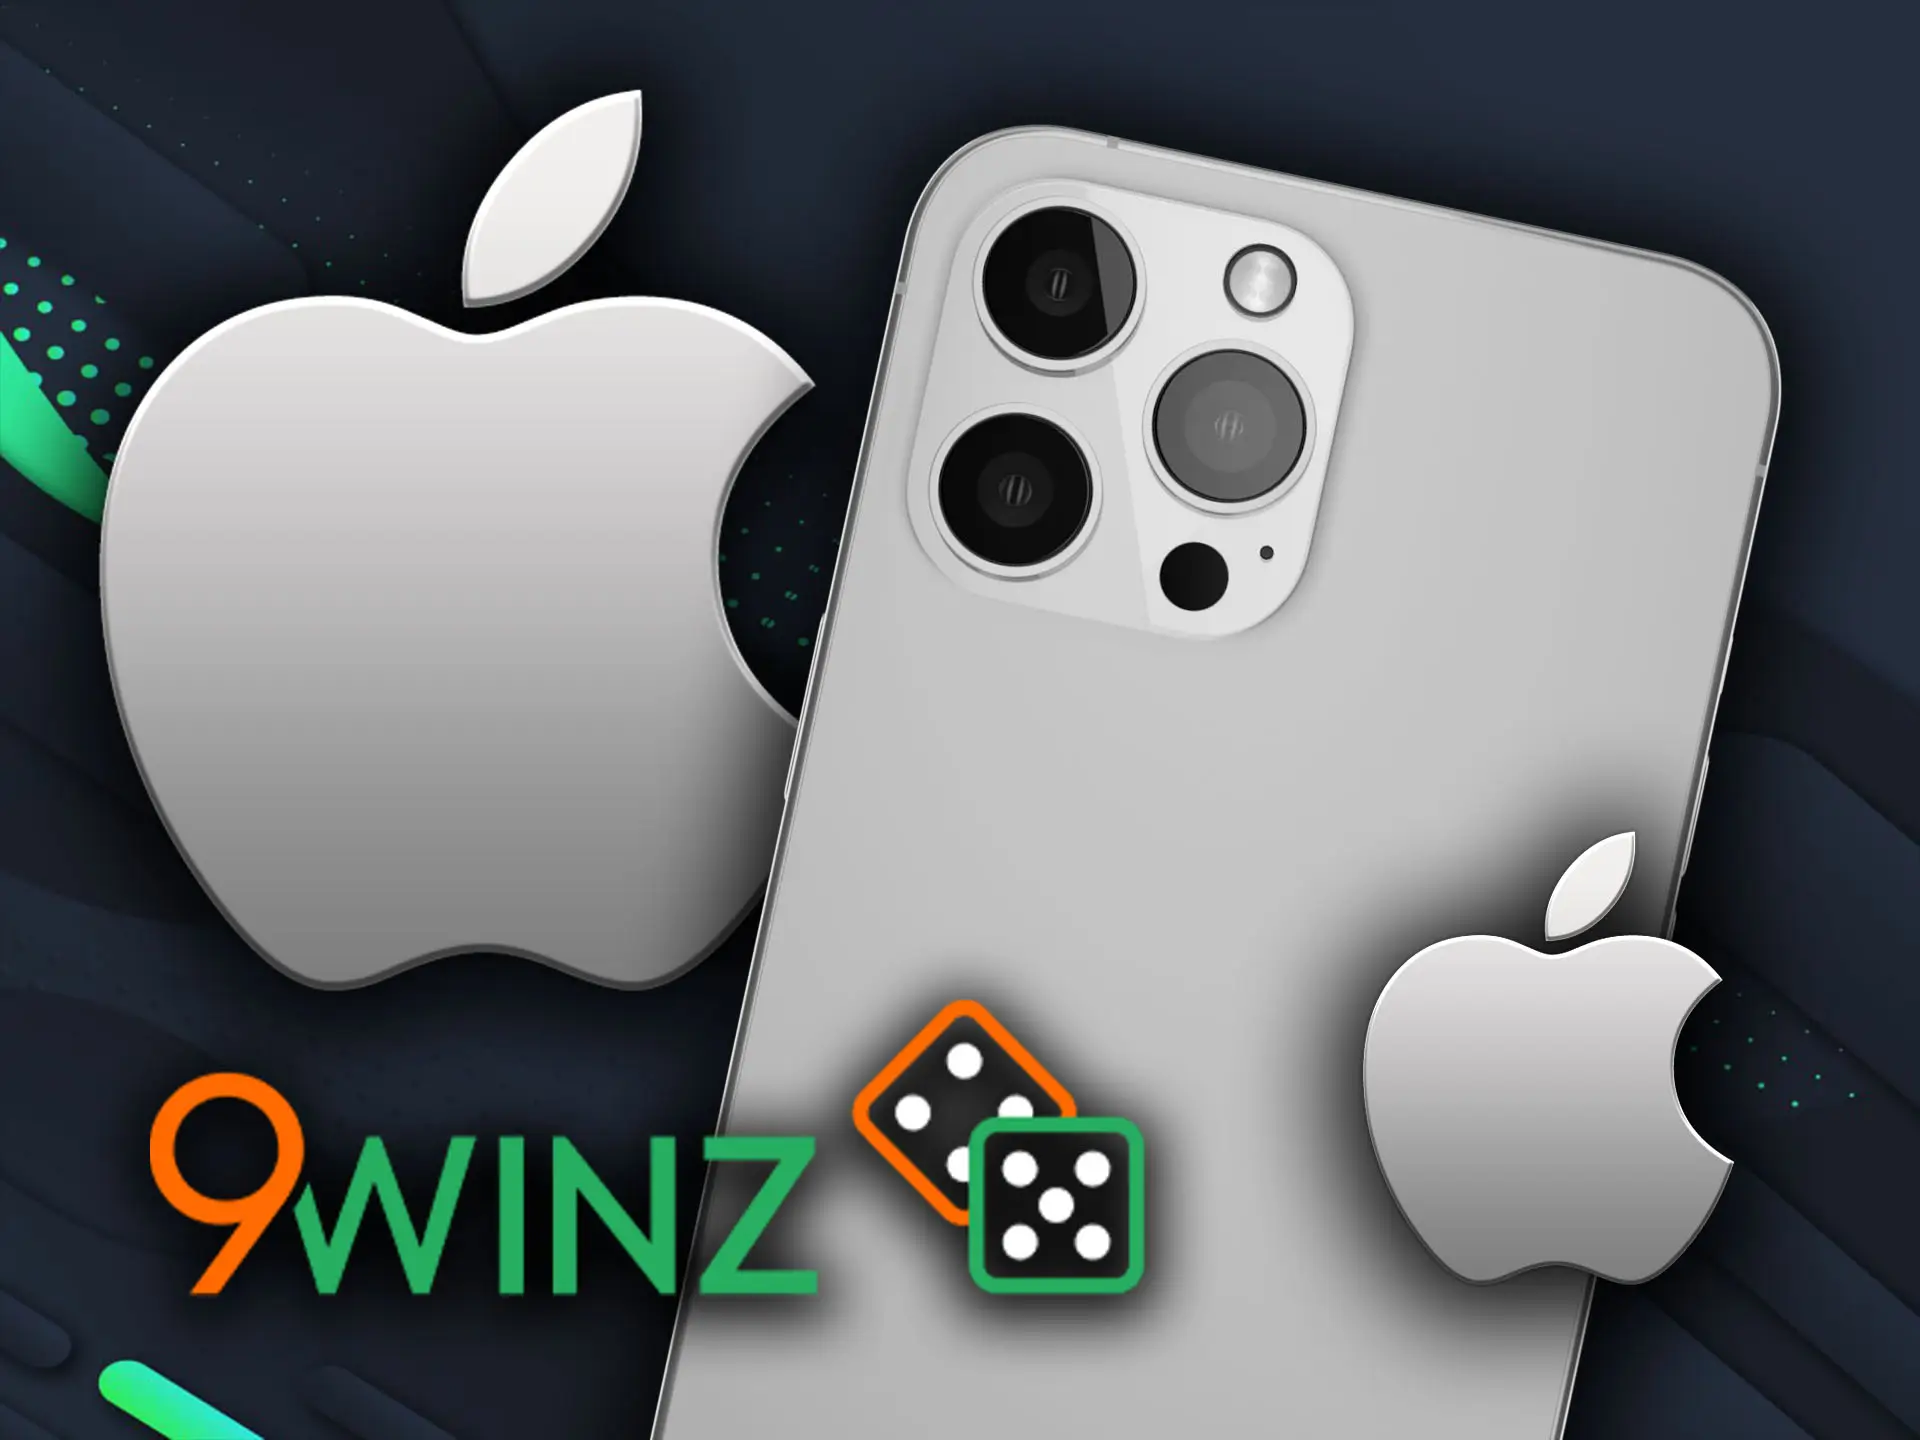 Many iOS devices support 9winz mobile version.